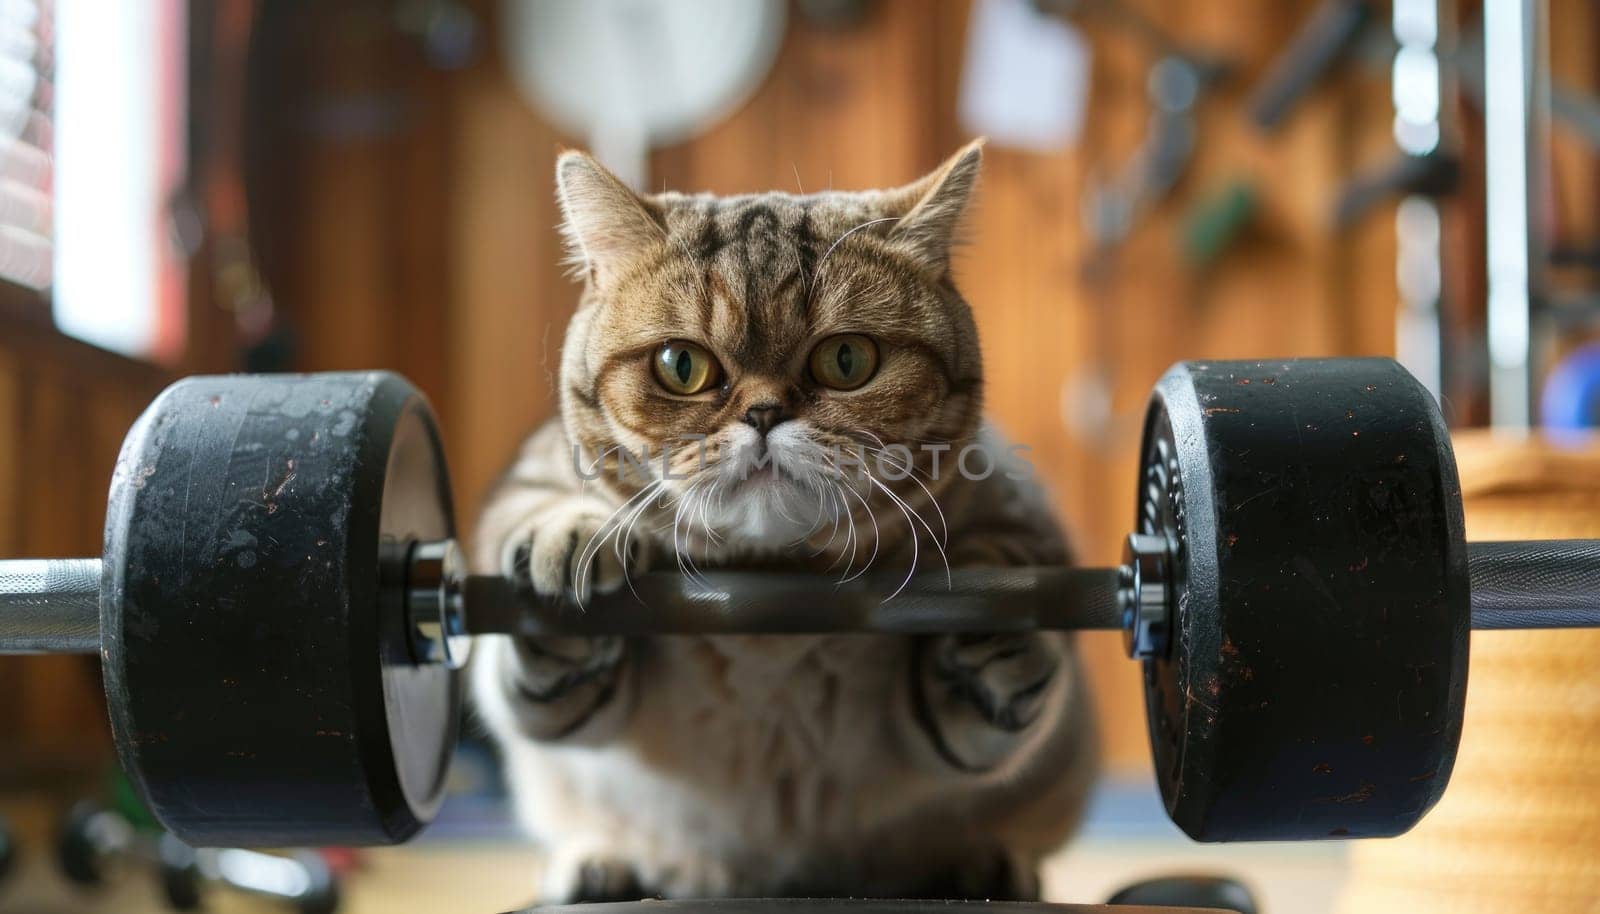 A cat is lifting a dumbbell in a gym by AI generated image.